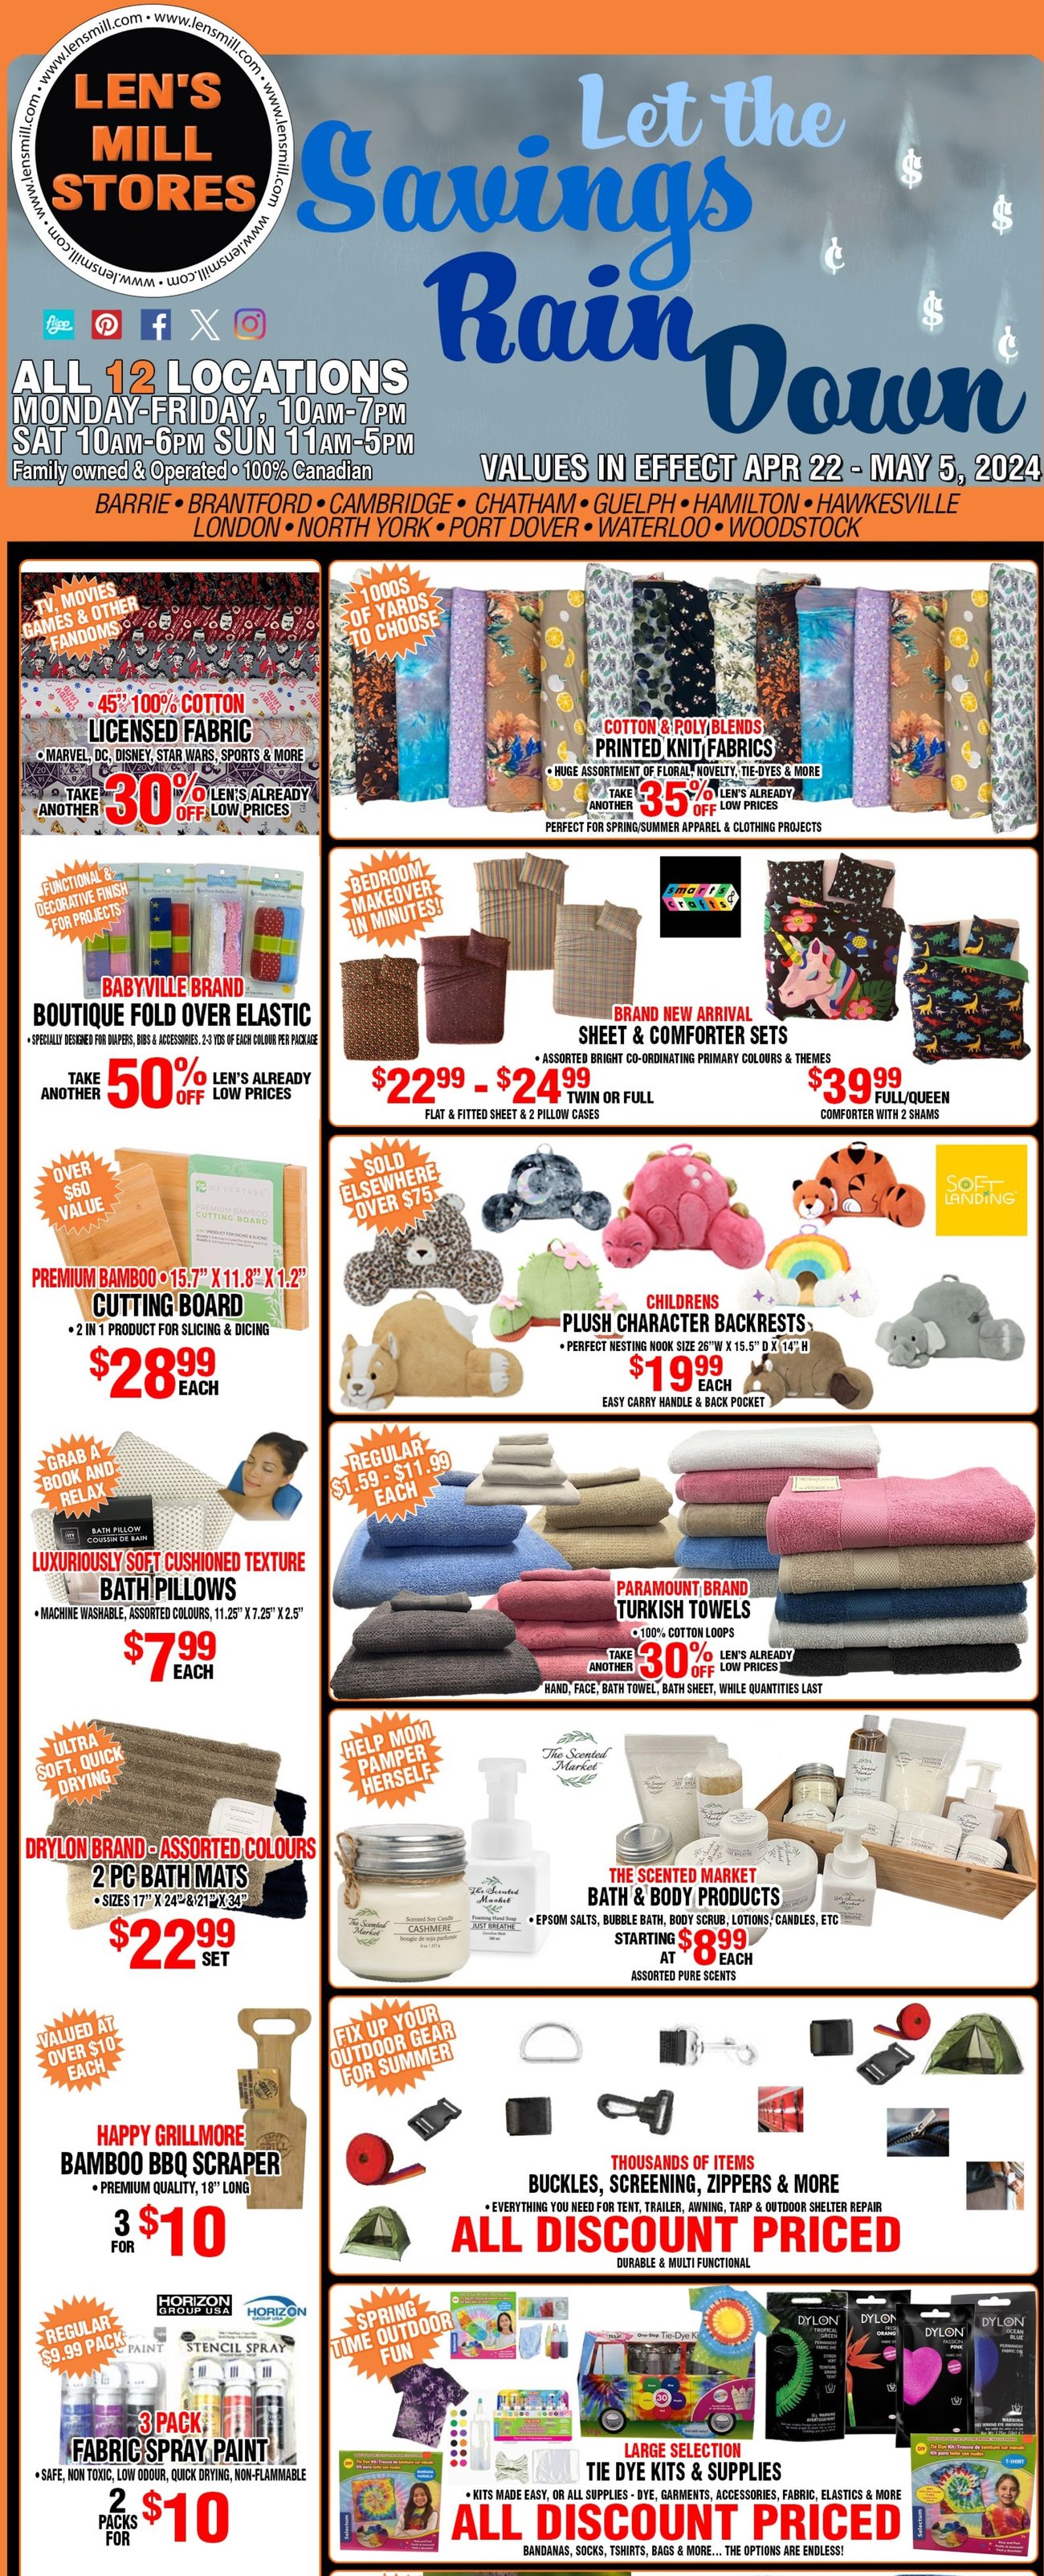 Len's Mill Stores - 2 Weeks of Savings - Page 1